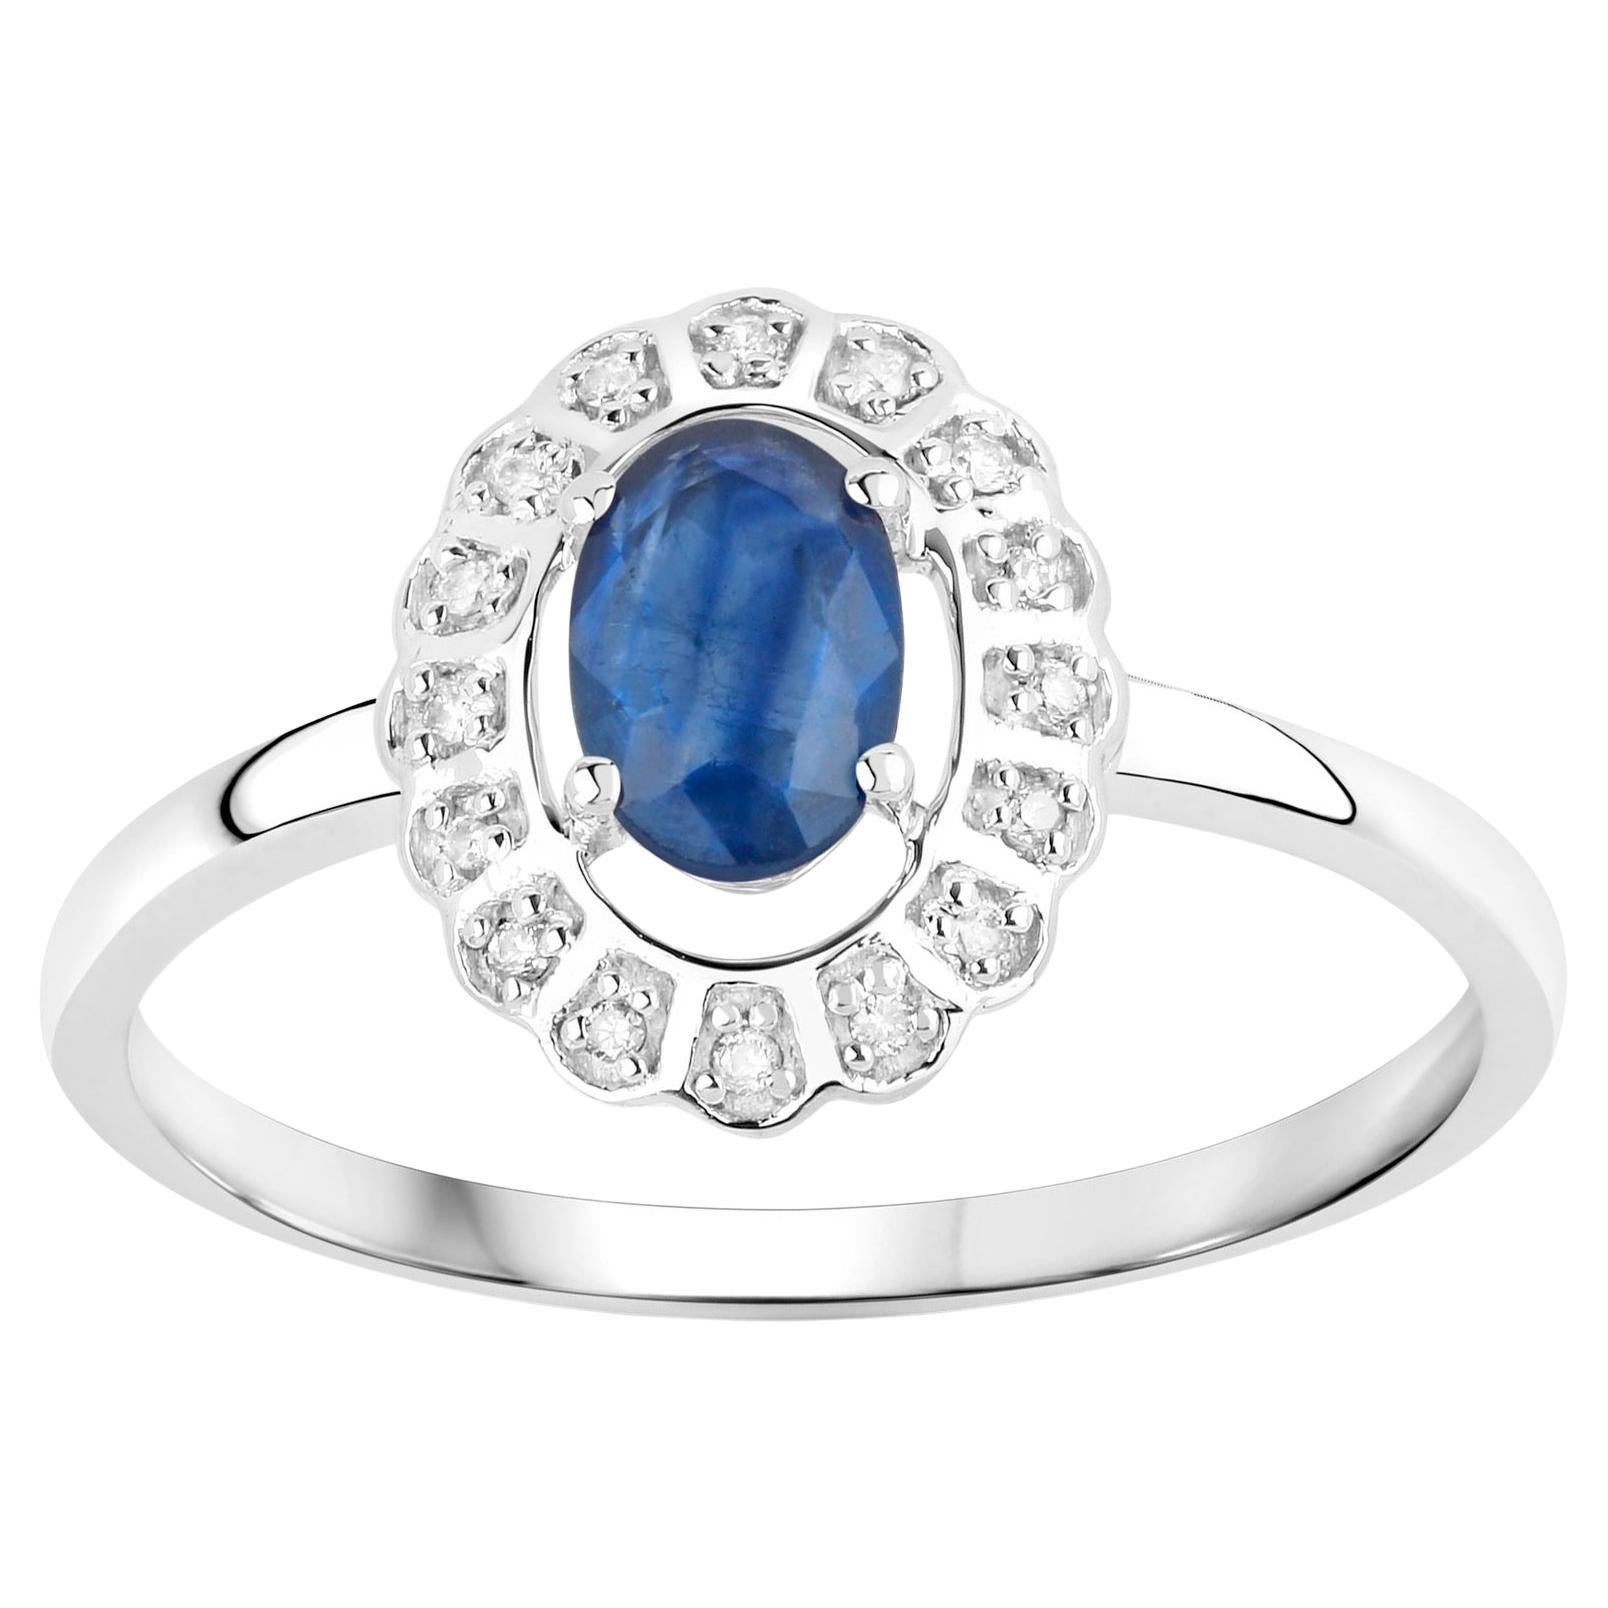 Blue Sapphire Ring With Diamonds 14K White Gold For Sale